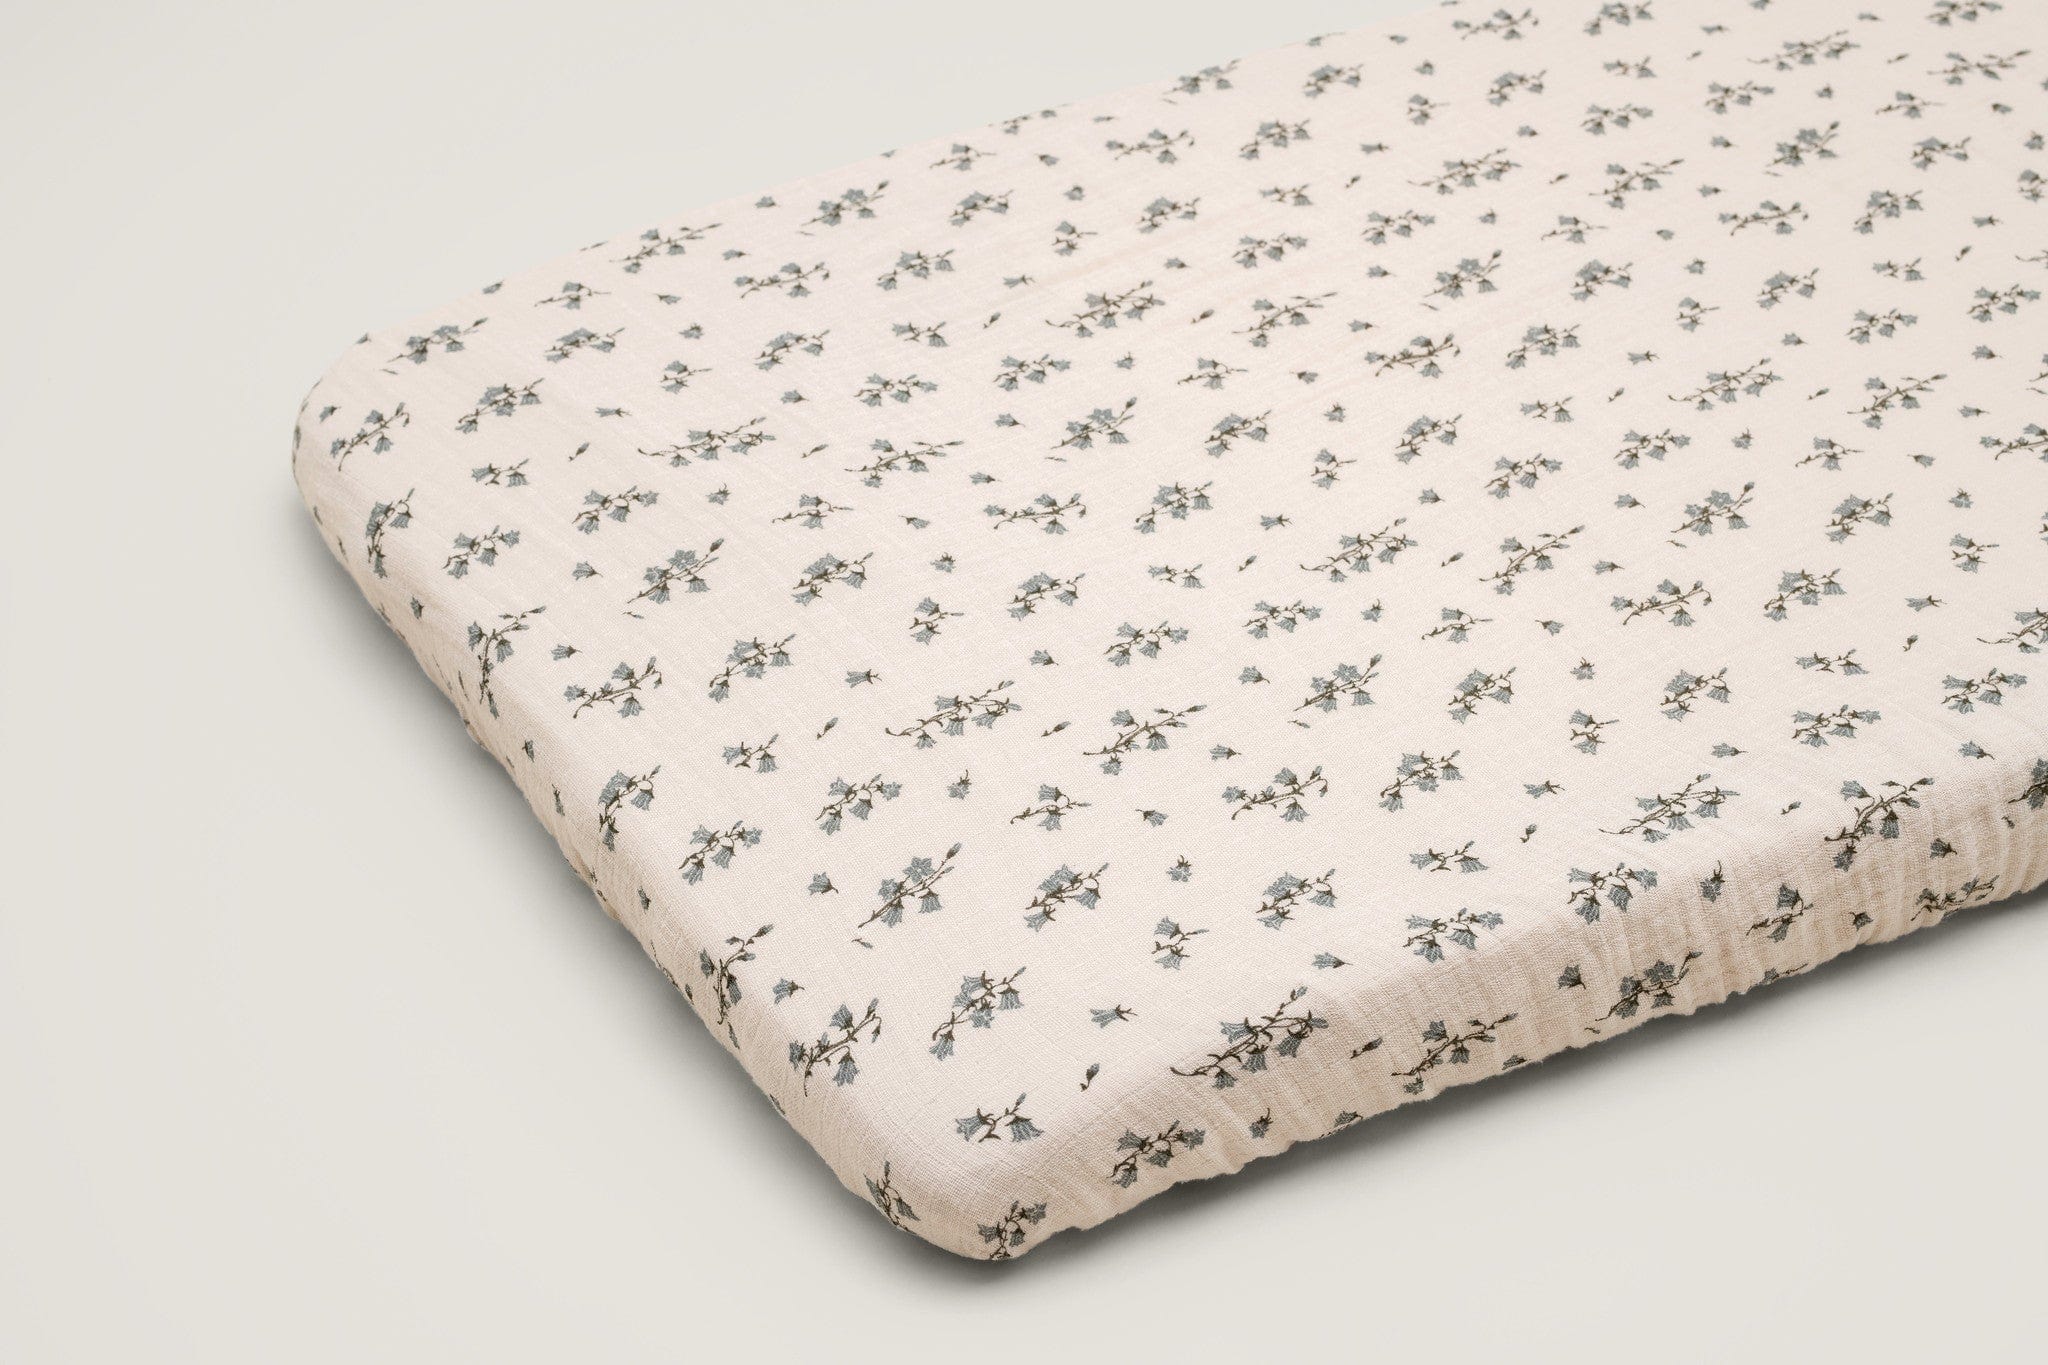 Muslin fitted sheet "Bellflower" for FREDERICK and PAUL